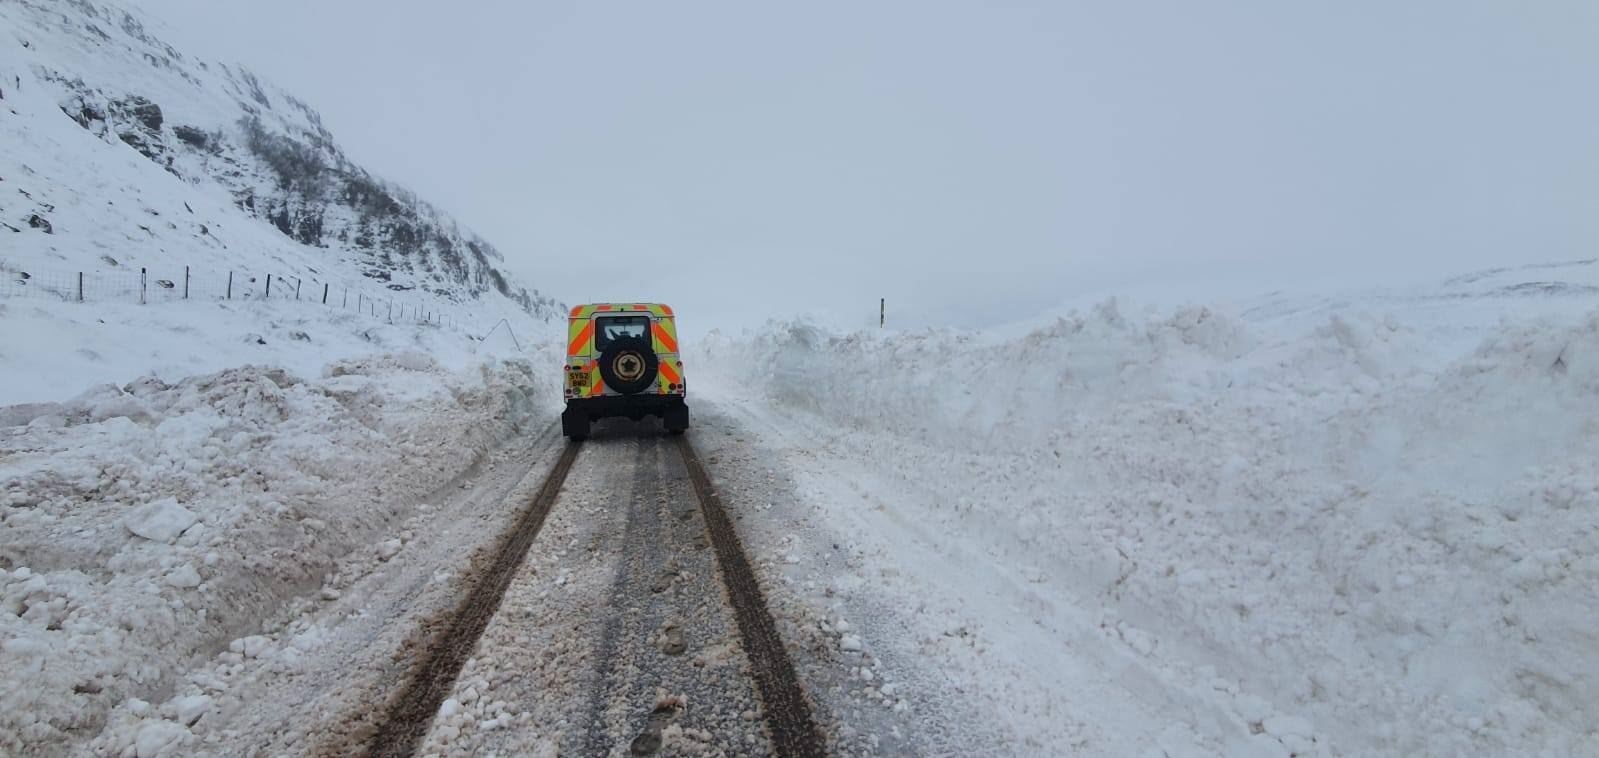 Conditions remain challenging despite efforts to unblock the road. Picture: Police Scotland